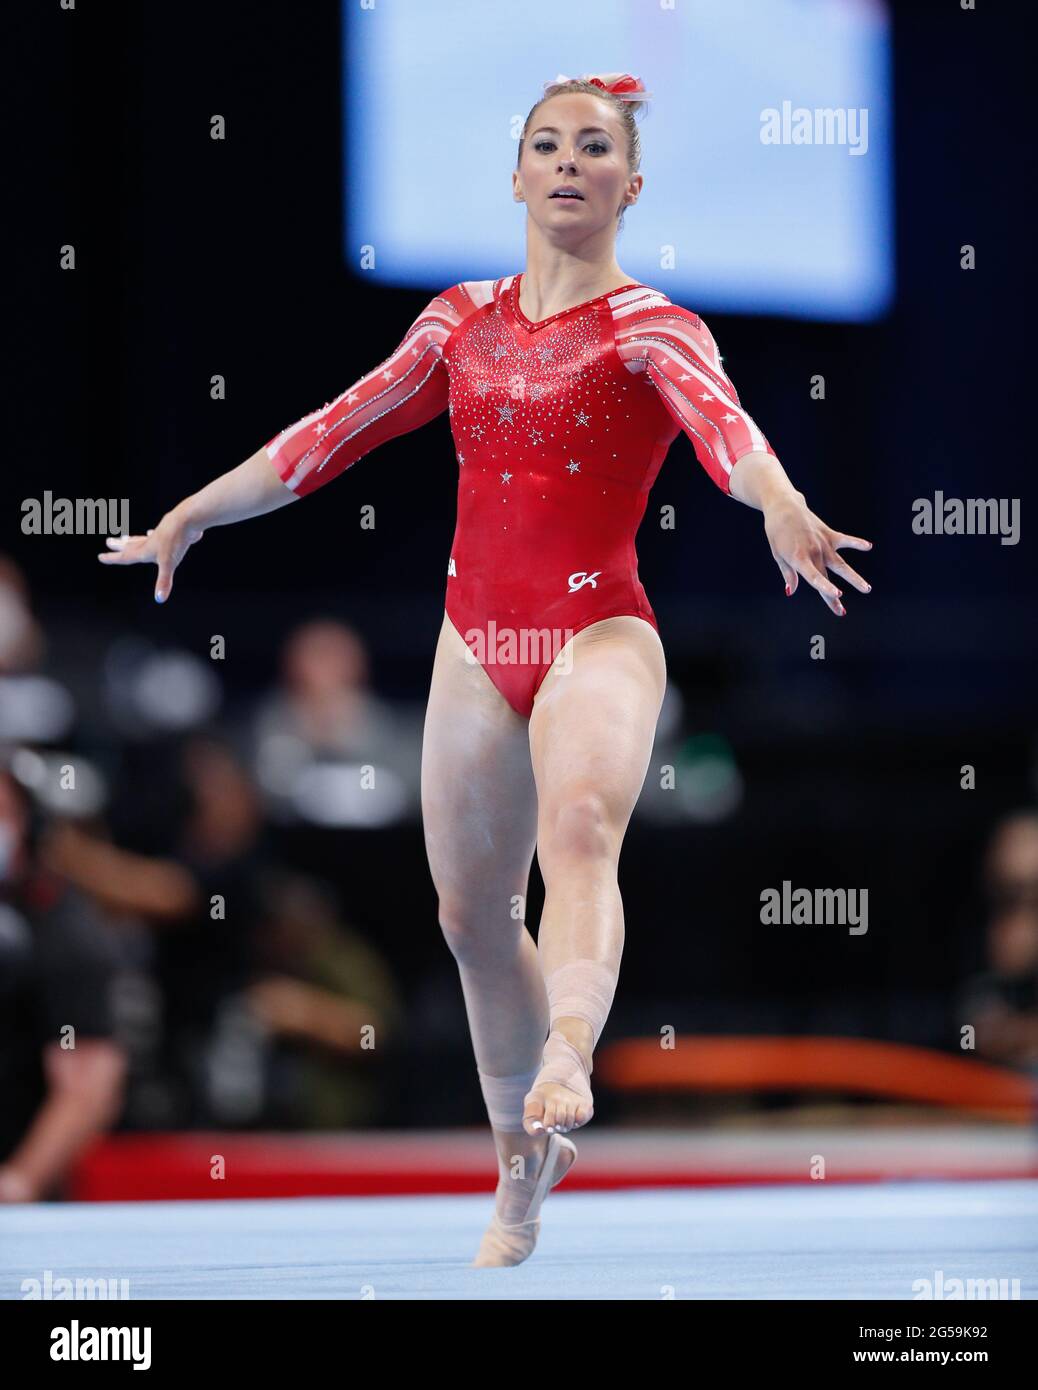 St Louis, USA. 25th June, 2021. June 25, 2021: MyKayla Skinner performs her floor routine during Day 1 of the 2021 U.S. Women's Gymnastics Olympic Team Trials at the Dome at America's Center in St. Louis, MO. Kyle Okita/CSM Credit: Cal Sport Media/Alamy Live News Stock Photo